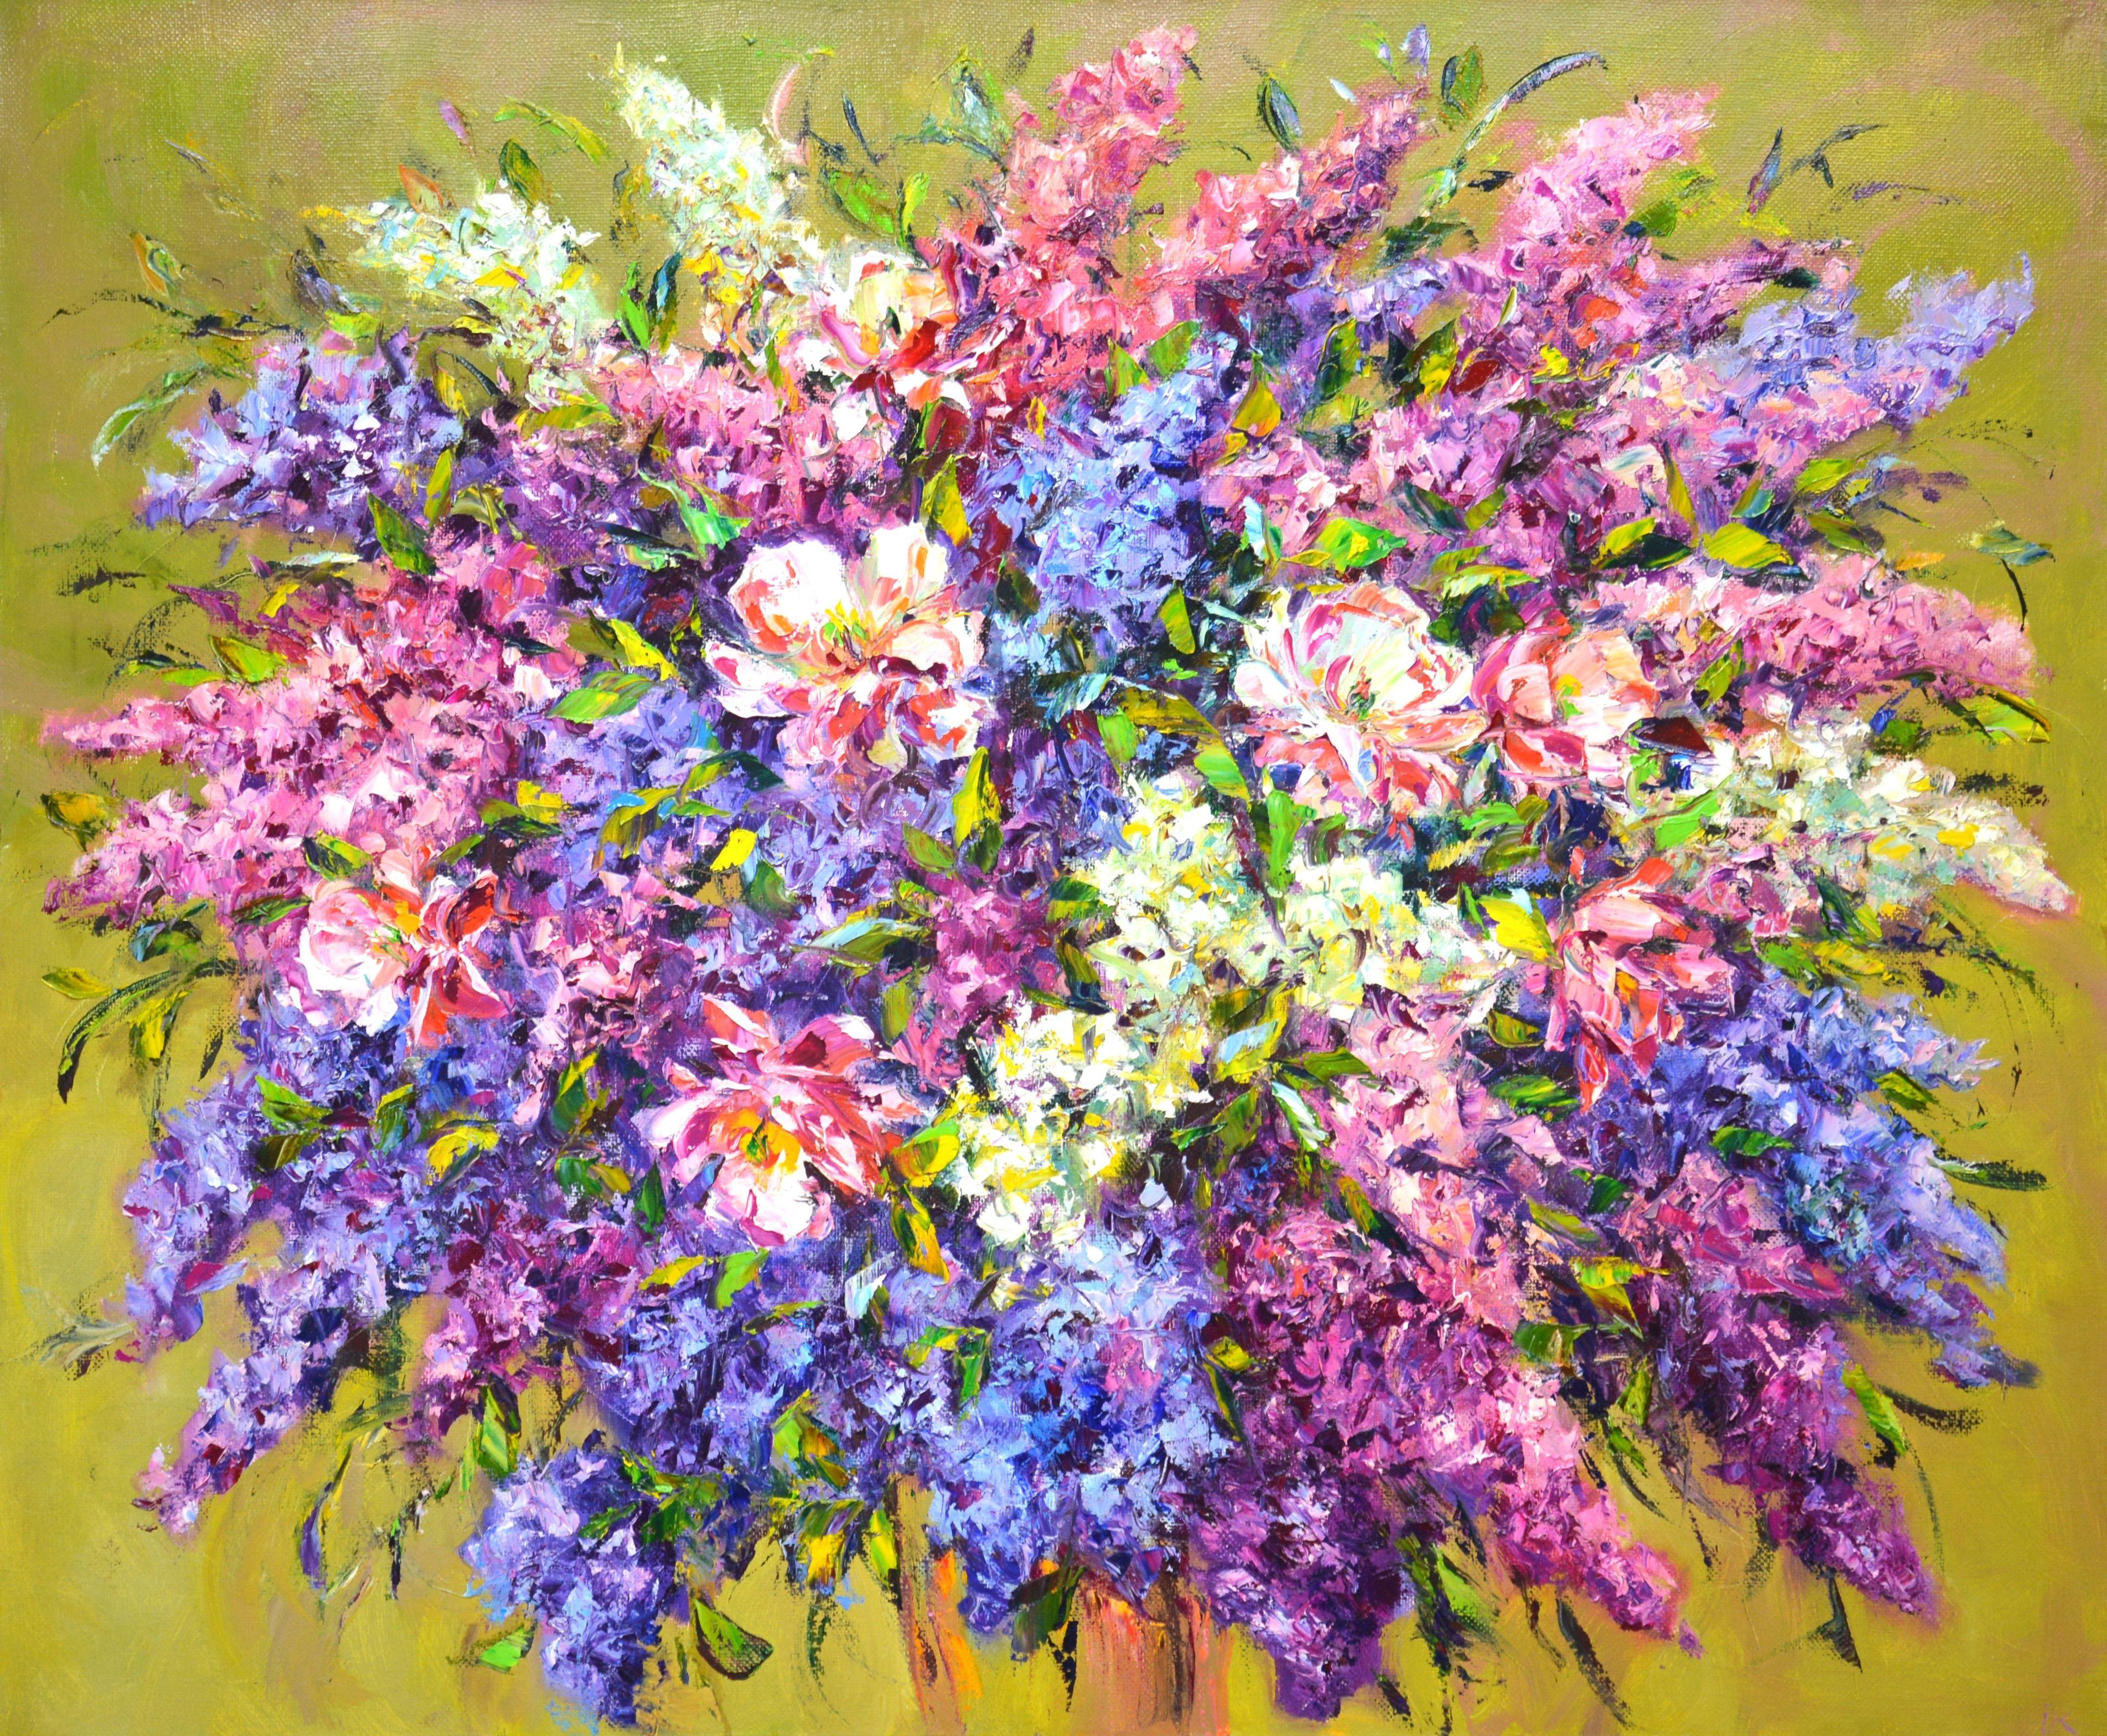 Flower mood 5. Lilac bouquet: pink, purple and white flowers on an abstract background, created with brushes and a spatula. The picture is filled with positive, solar energy. Part of a permanent series of floral arrangements. Impressionism. Used